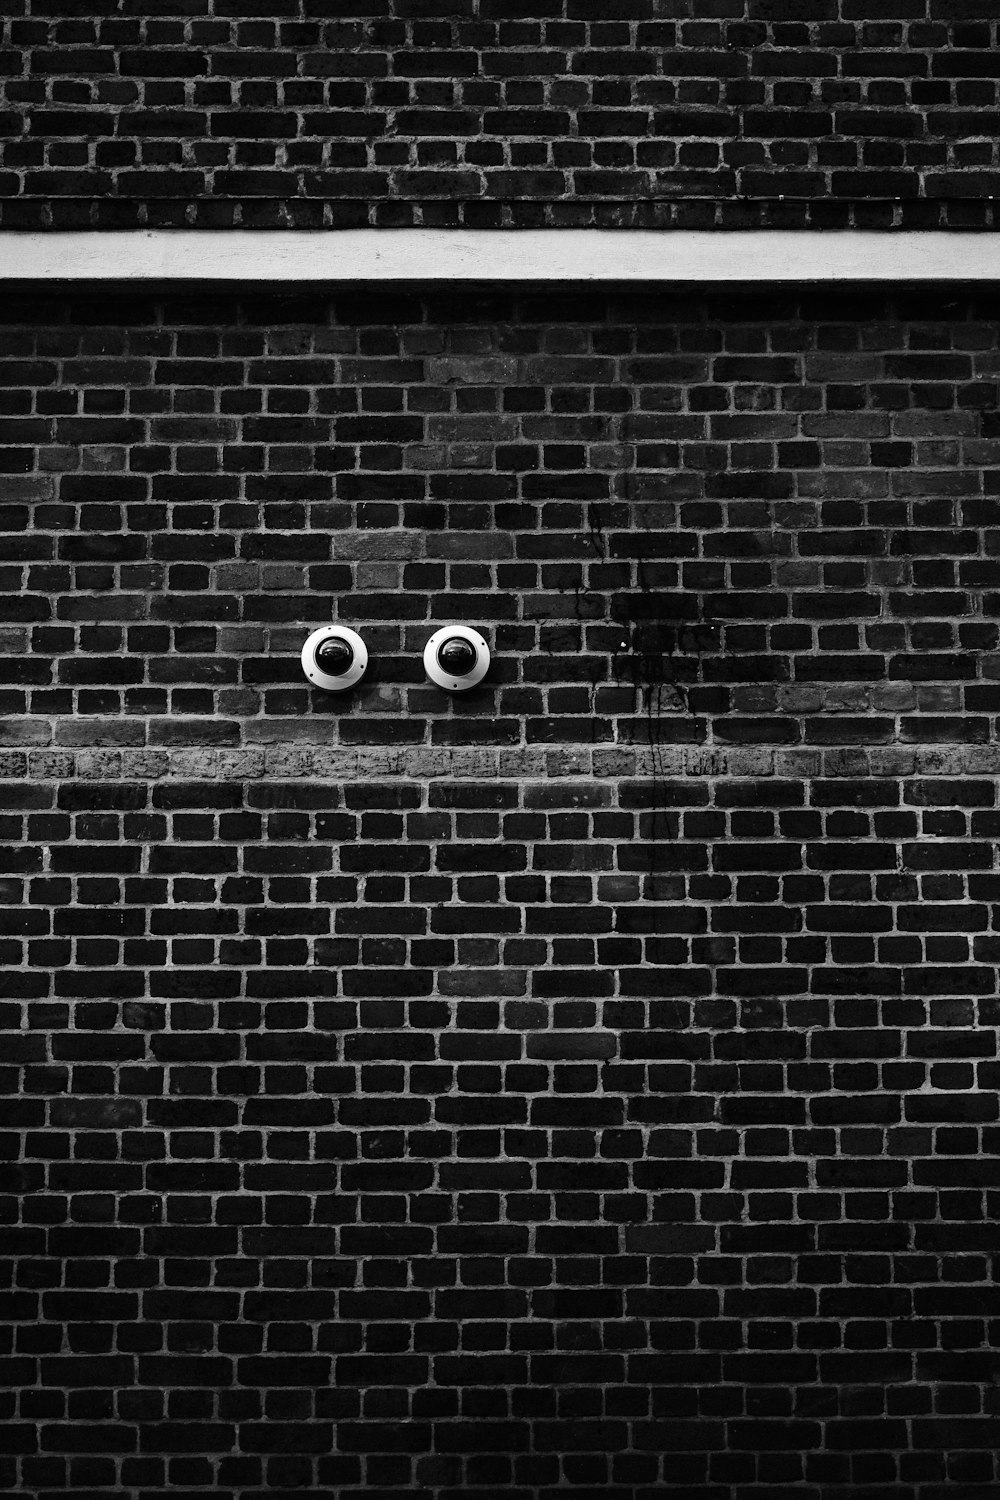 a black and white photo of two eyes on a brick wall